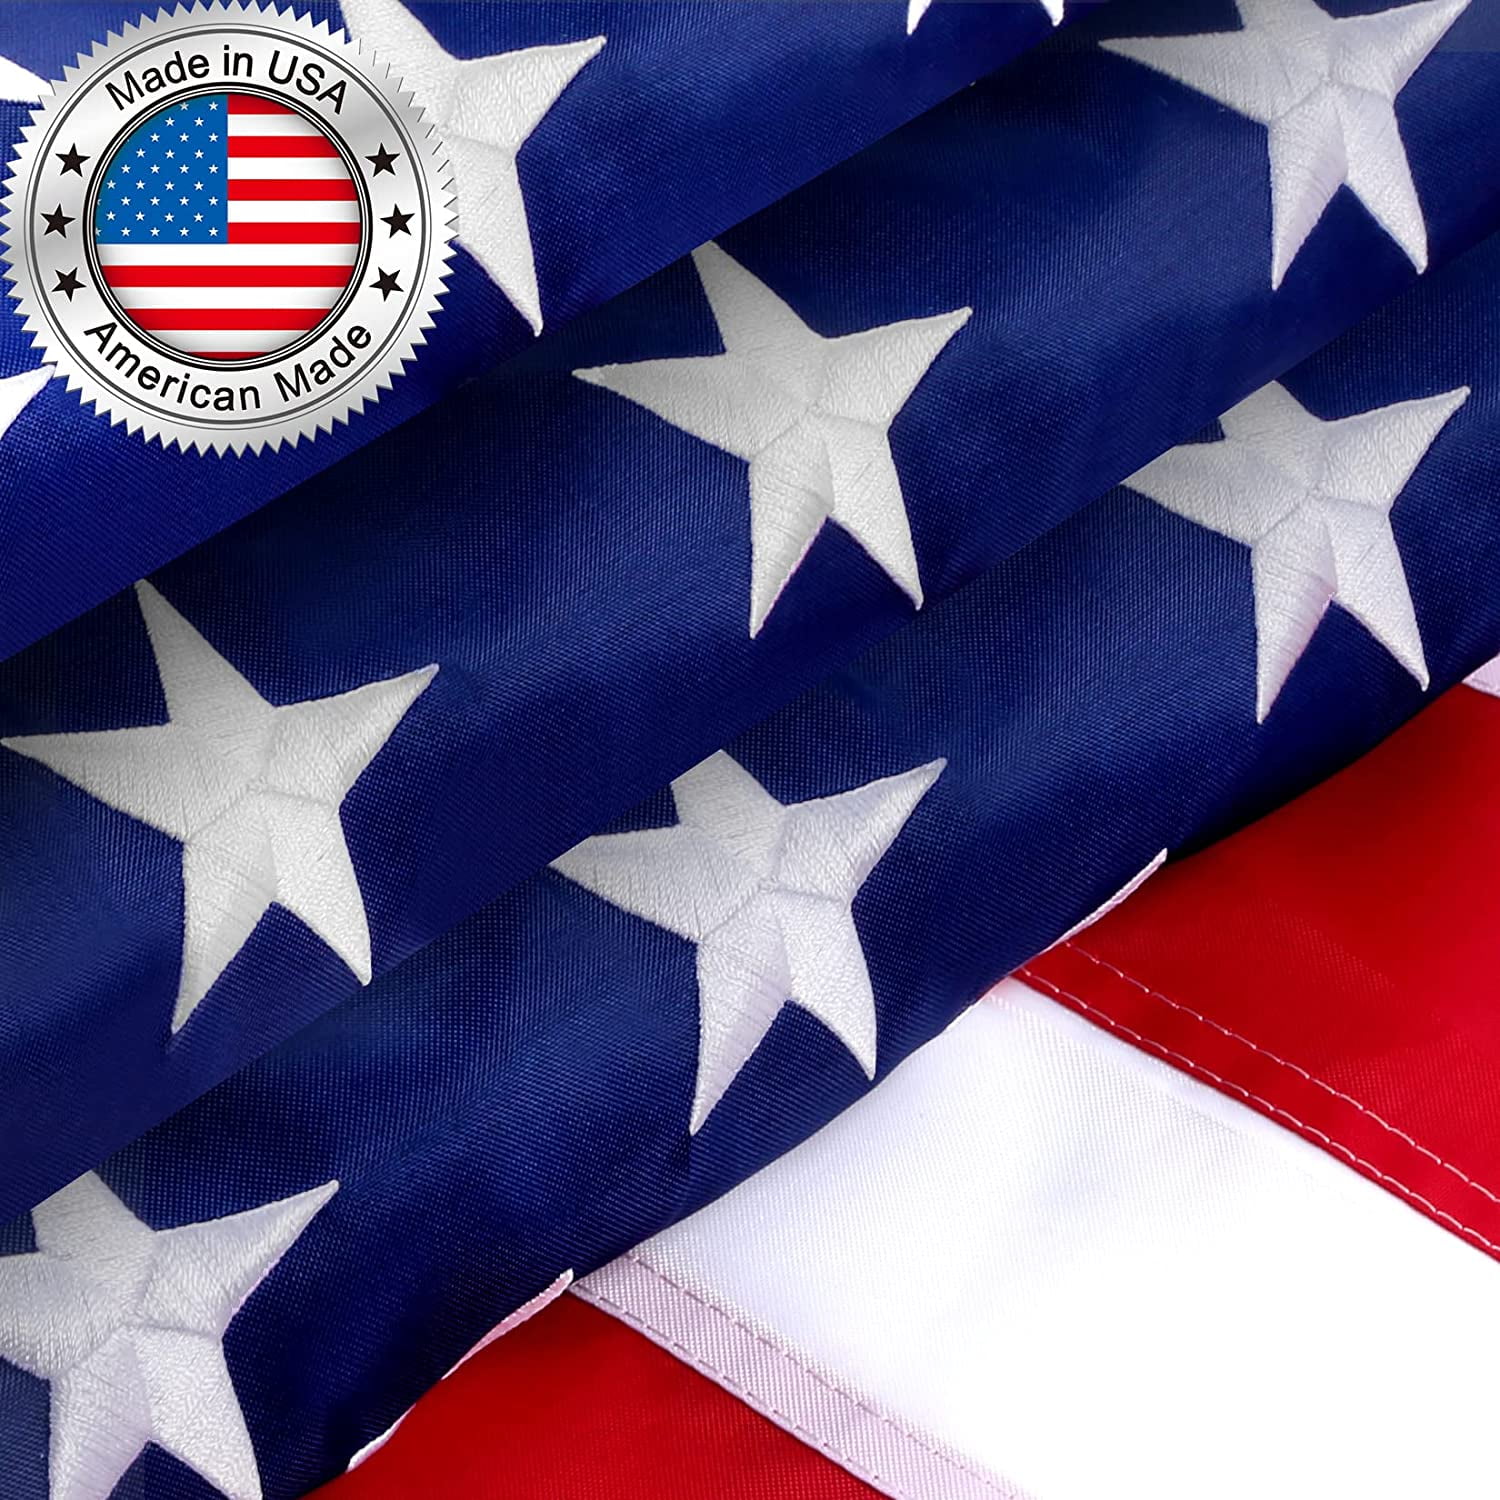 Durable Longest Lasting Spun Polyester 300d US USA Flags for sale online American Flag 3x5 Ft 